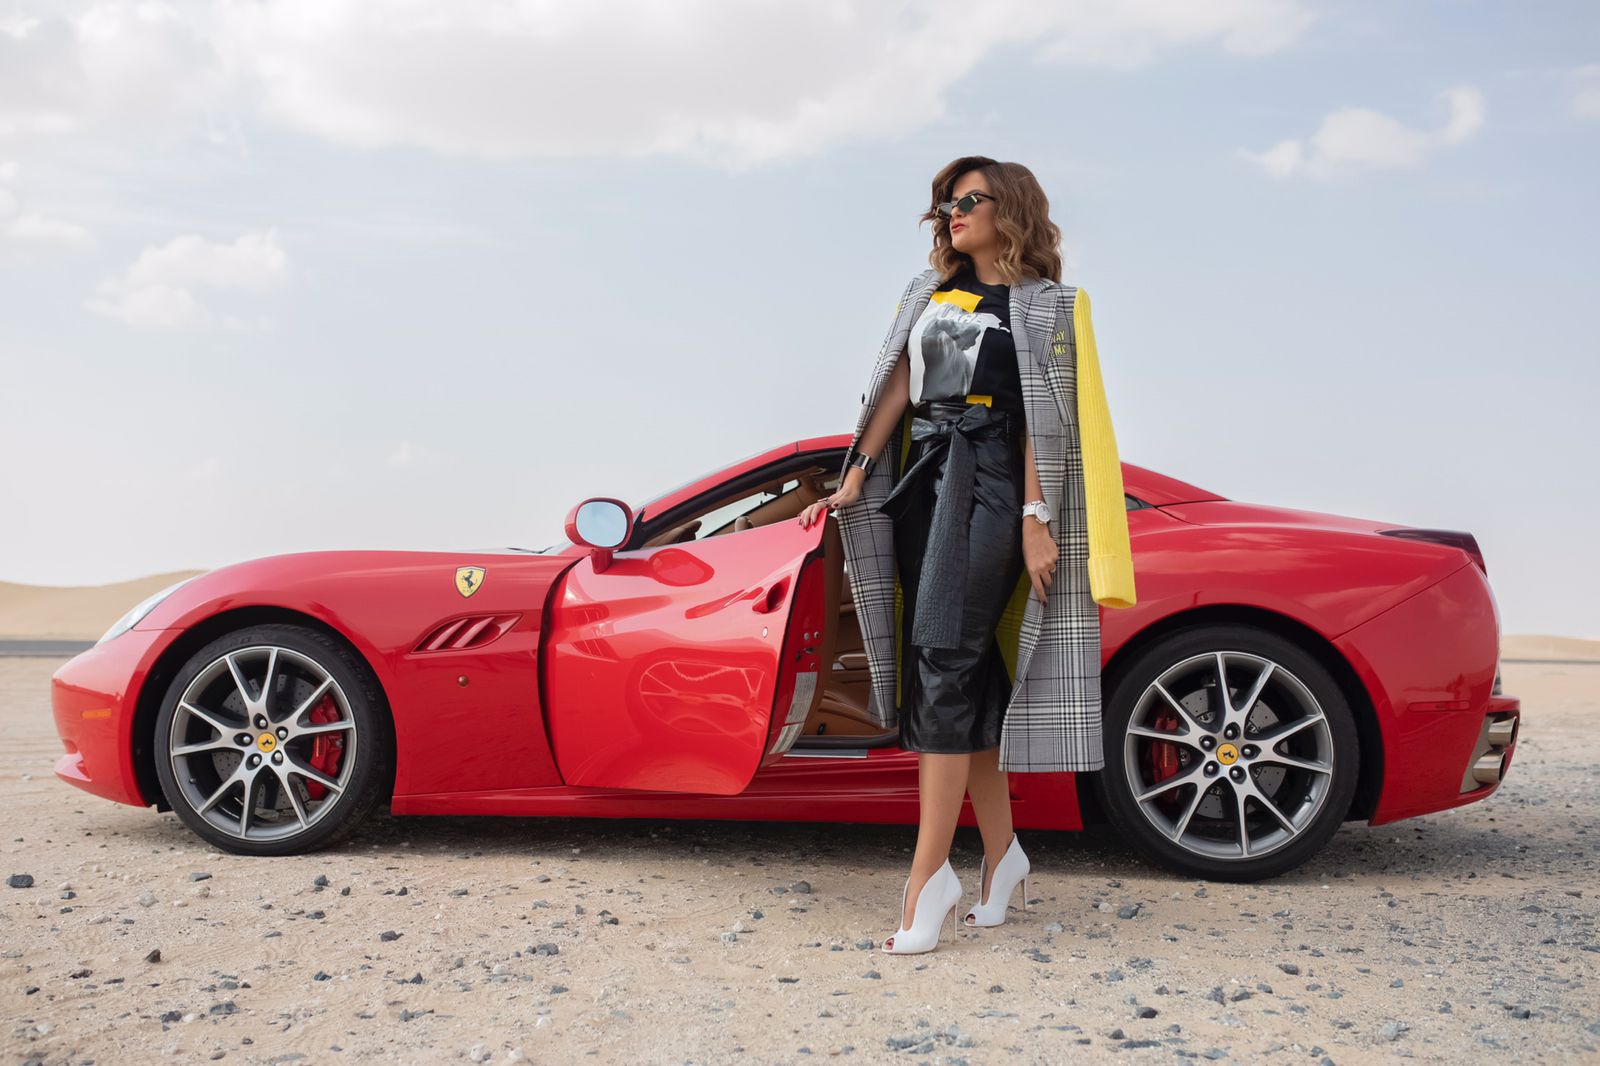 The top one fashion n icon, Sarah Fadhlaoui, and her love and passion for speed cars